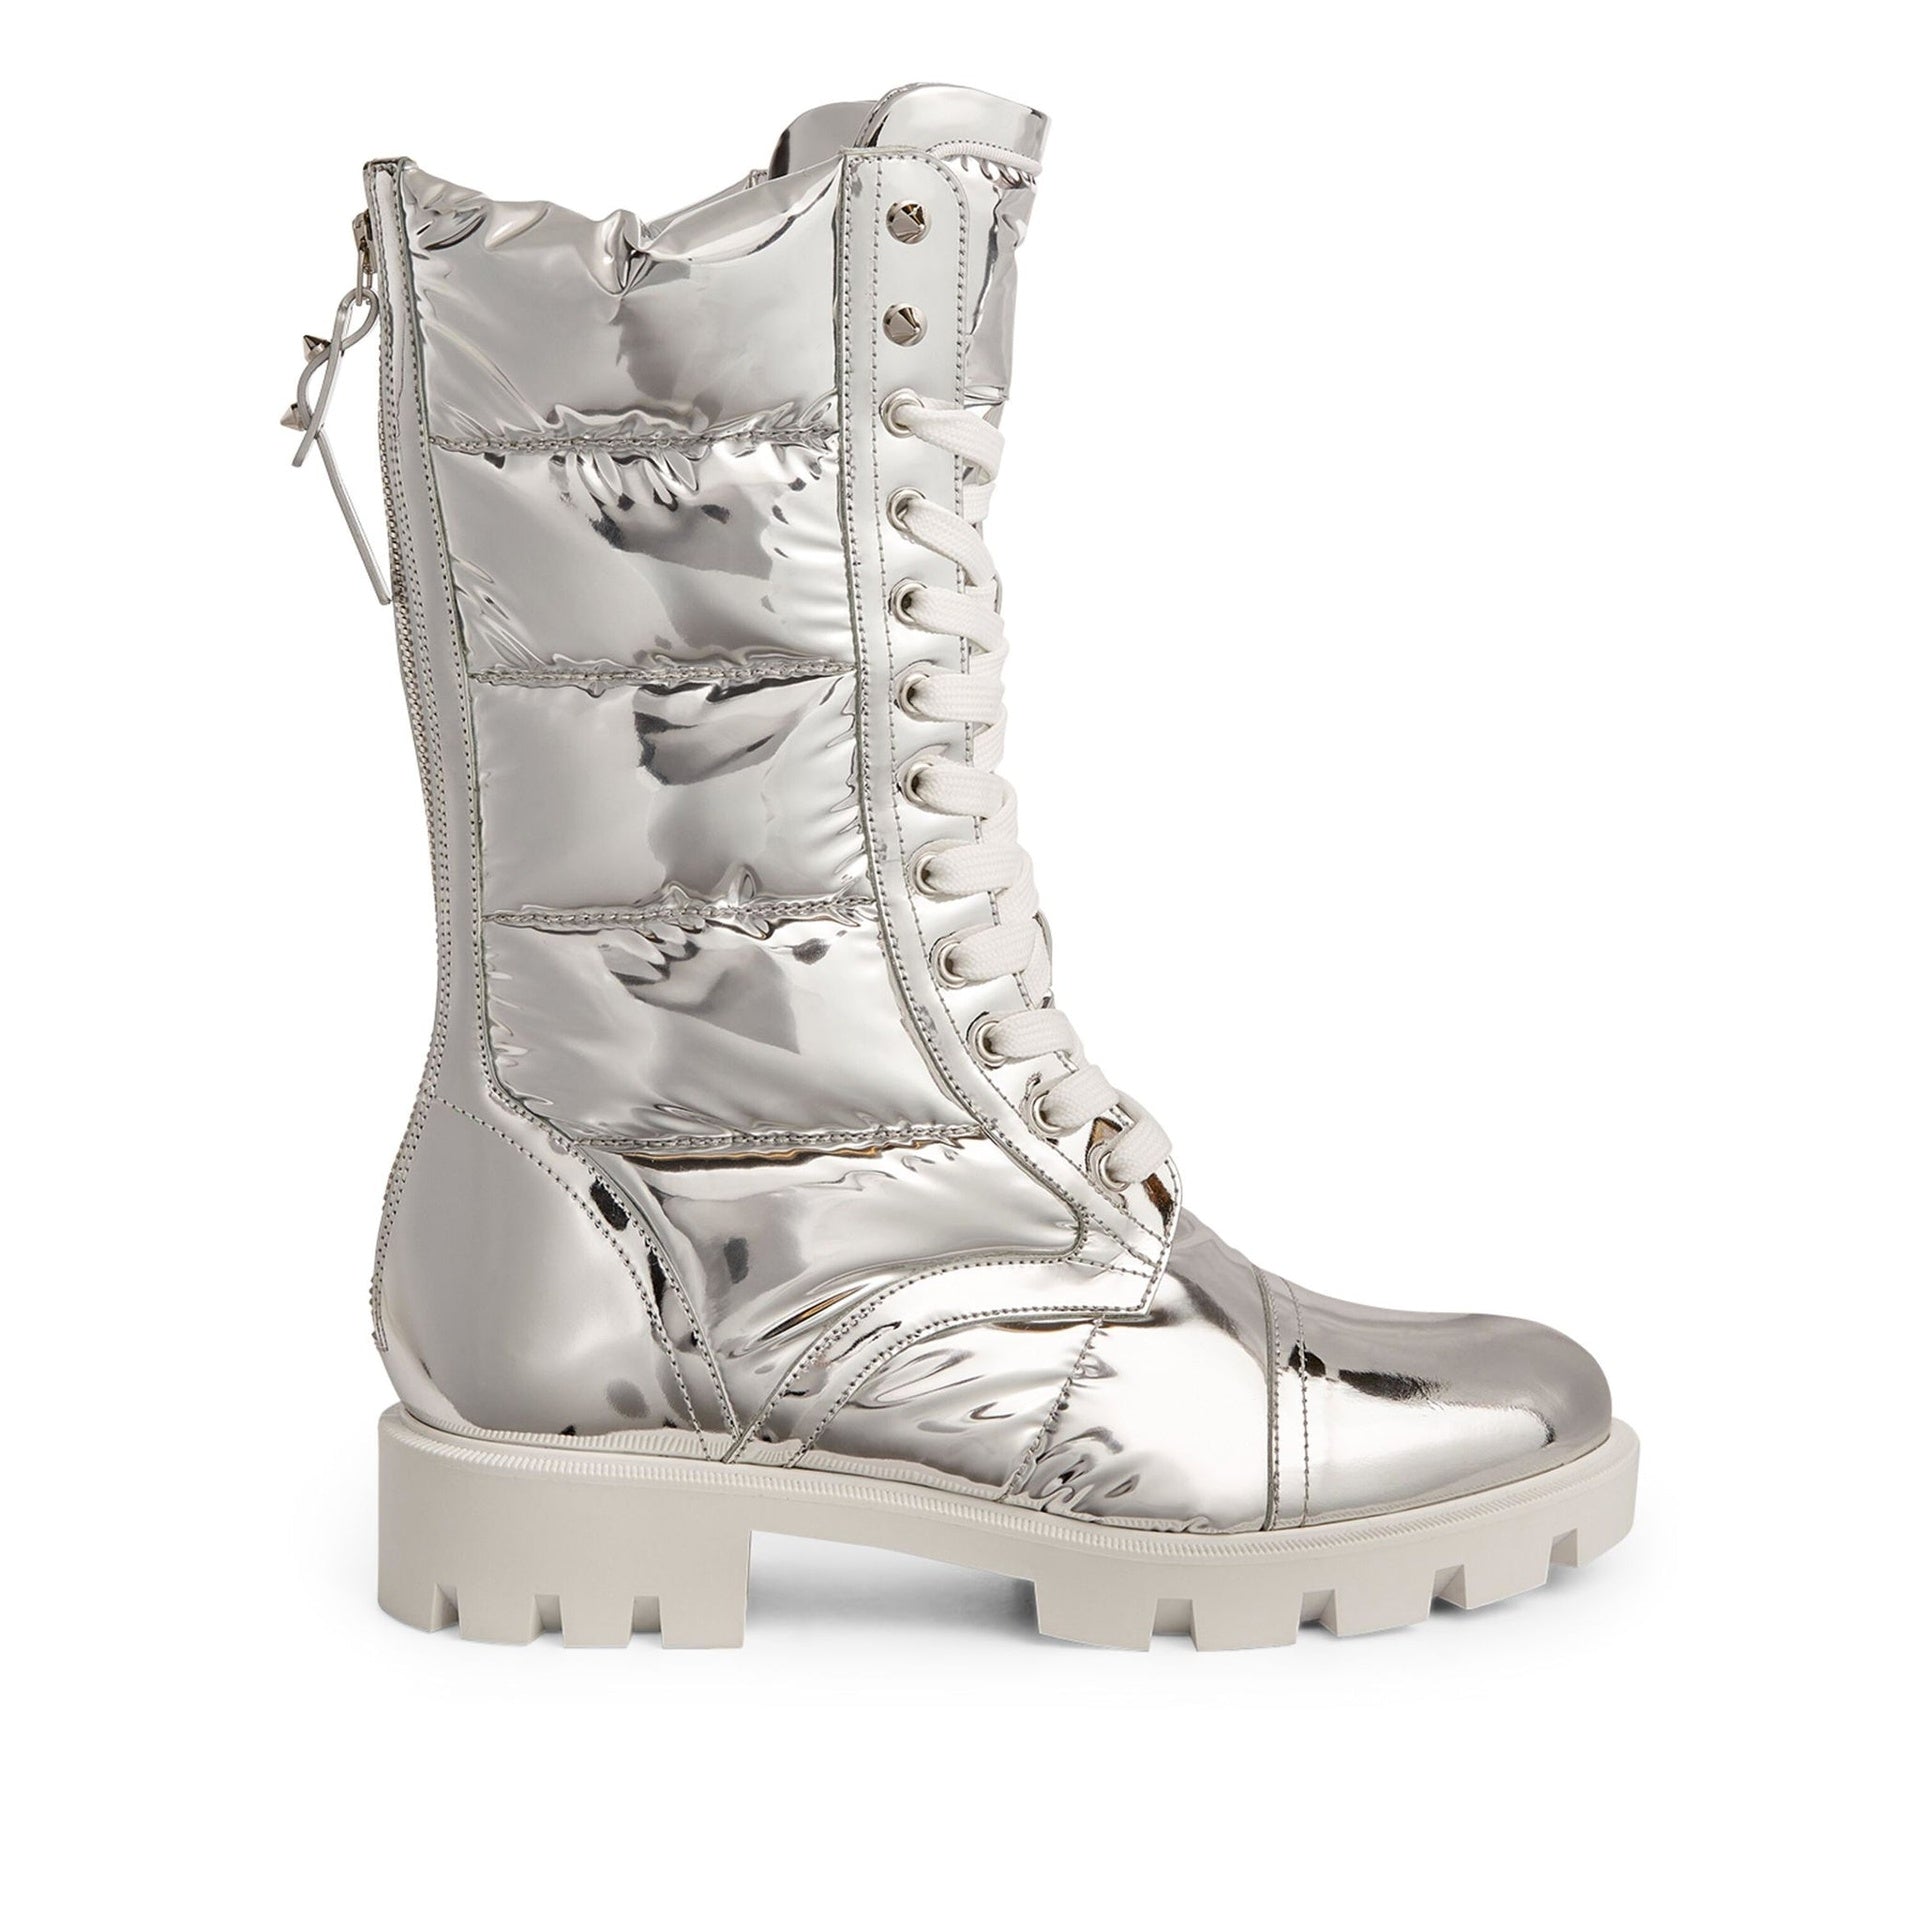 CHRISTIAN-LOUBOUTIN-OUTLET-SALE-Christian-Louboutin-Pavleta-Silver-Boots-Stiefel-Stiefeletten-GREY-35_5-ARCHIVE-COLLECTION.jpg